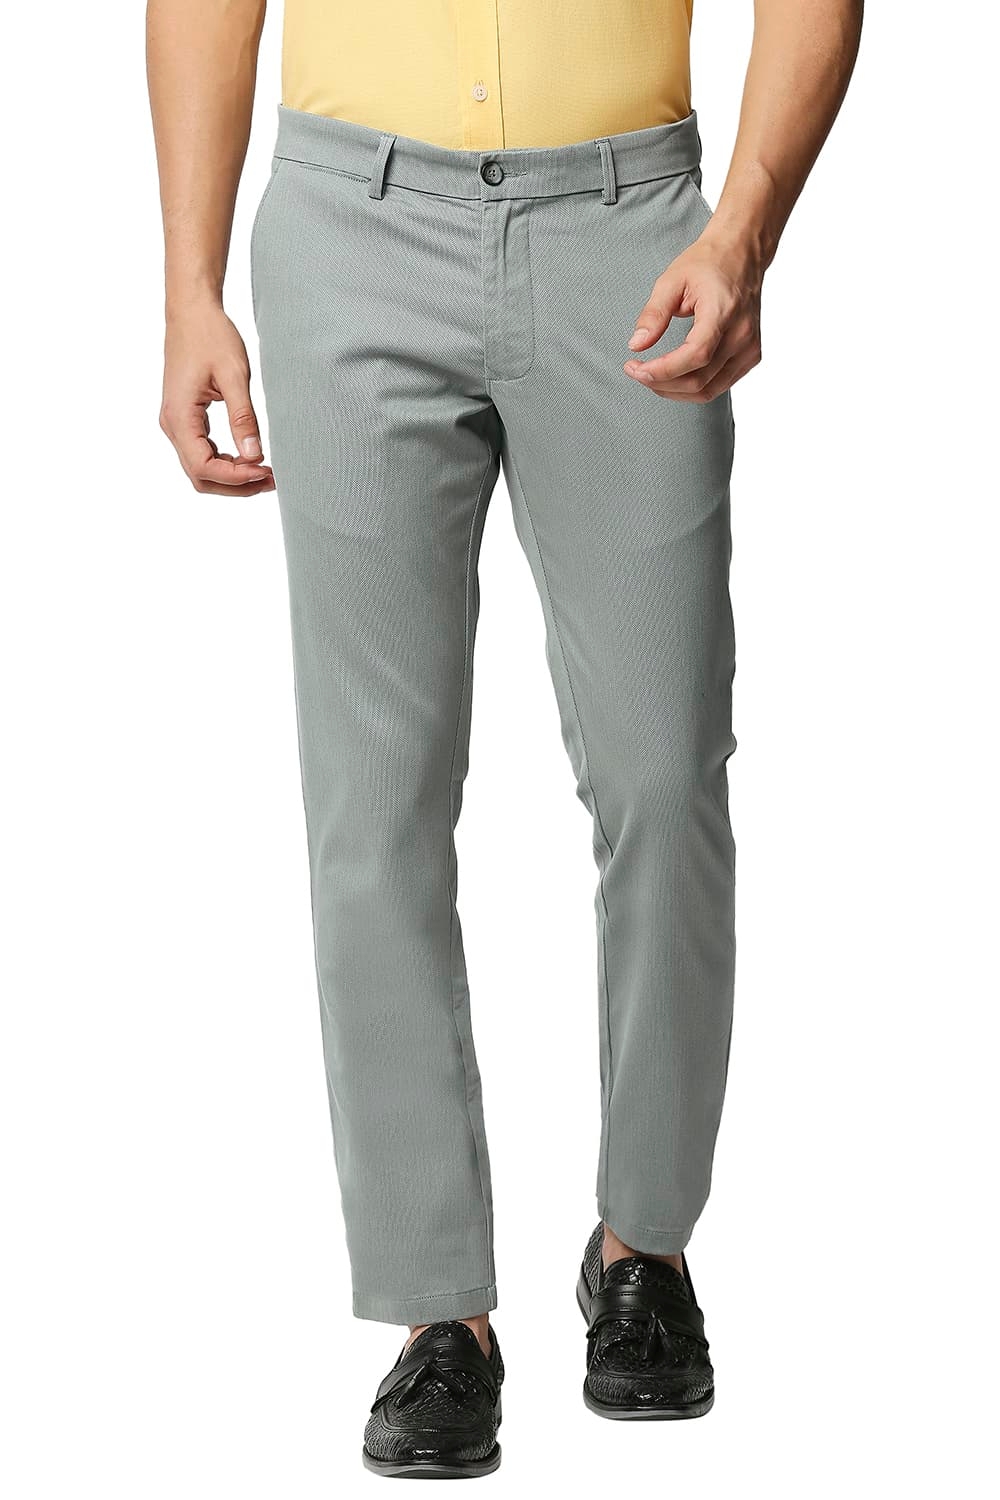 Basics | BASICS CASUAL PRINTED MID GREY COTTON STRETCH TAPERED TROUSERS 